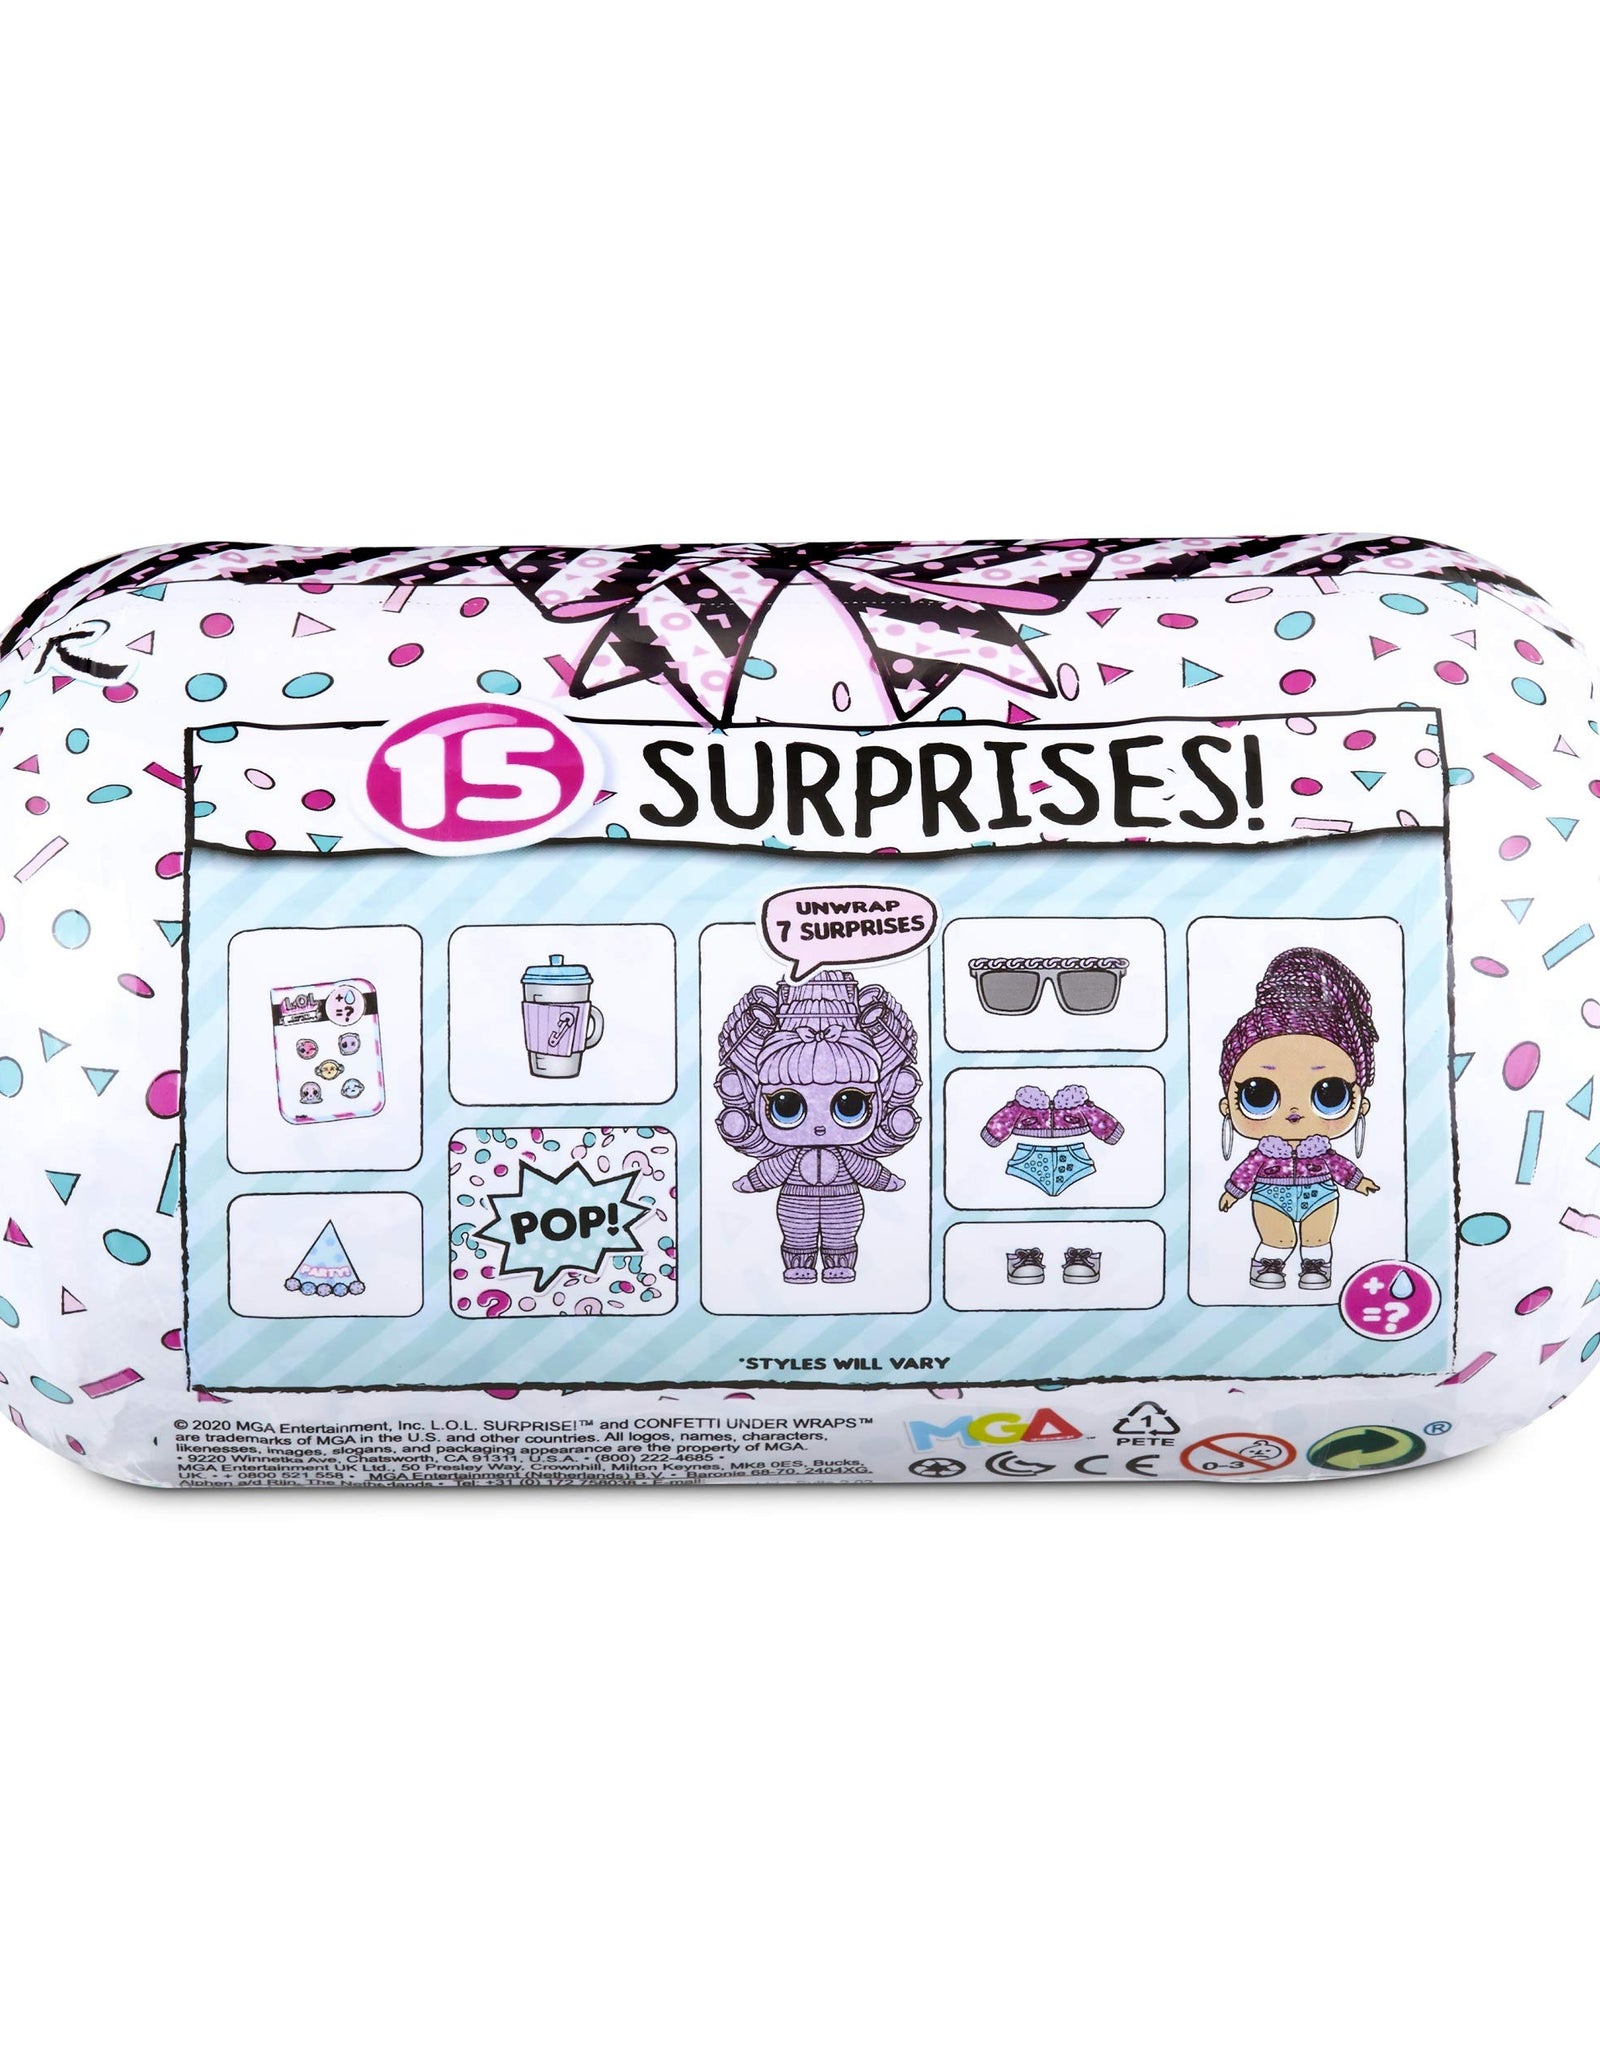 LOL Surprise Confetti Under Wraps Playset Re-Released Toy Doll with 15 Surprises - Girls Gifts Baby Doll Set with Doll Accessories - Birthday Present for Girls Ages 6-11 Years